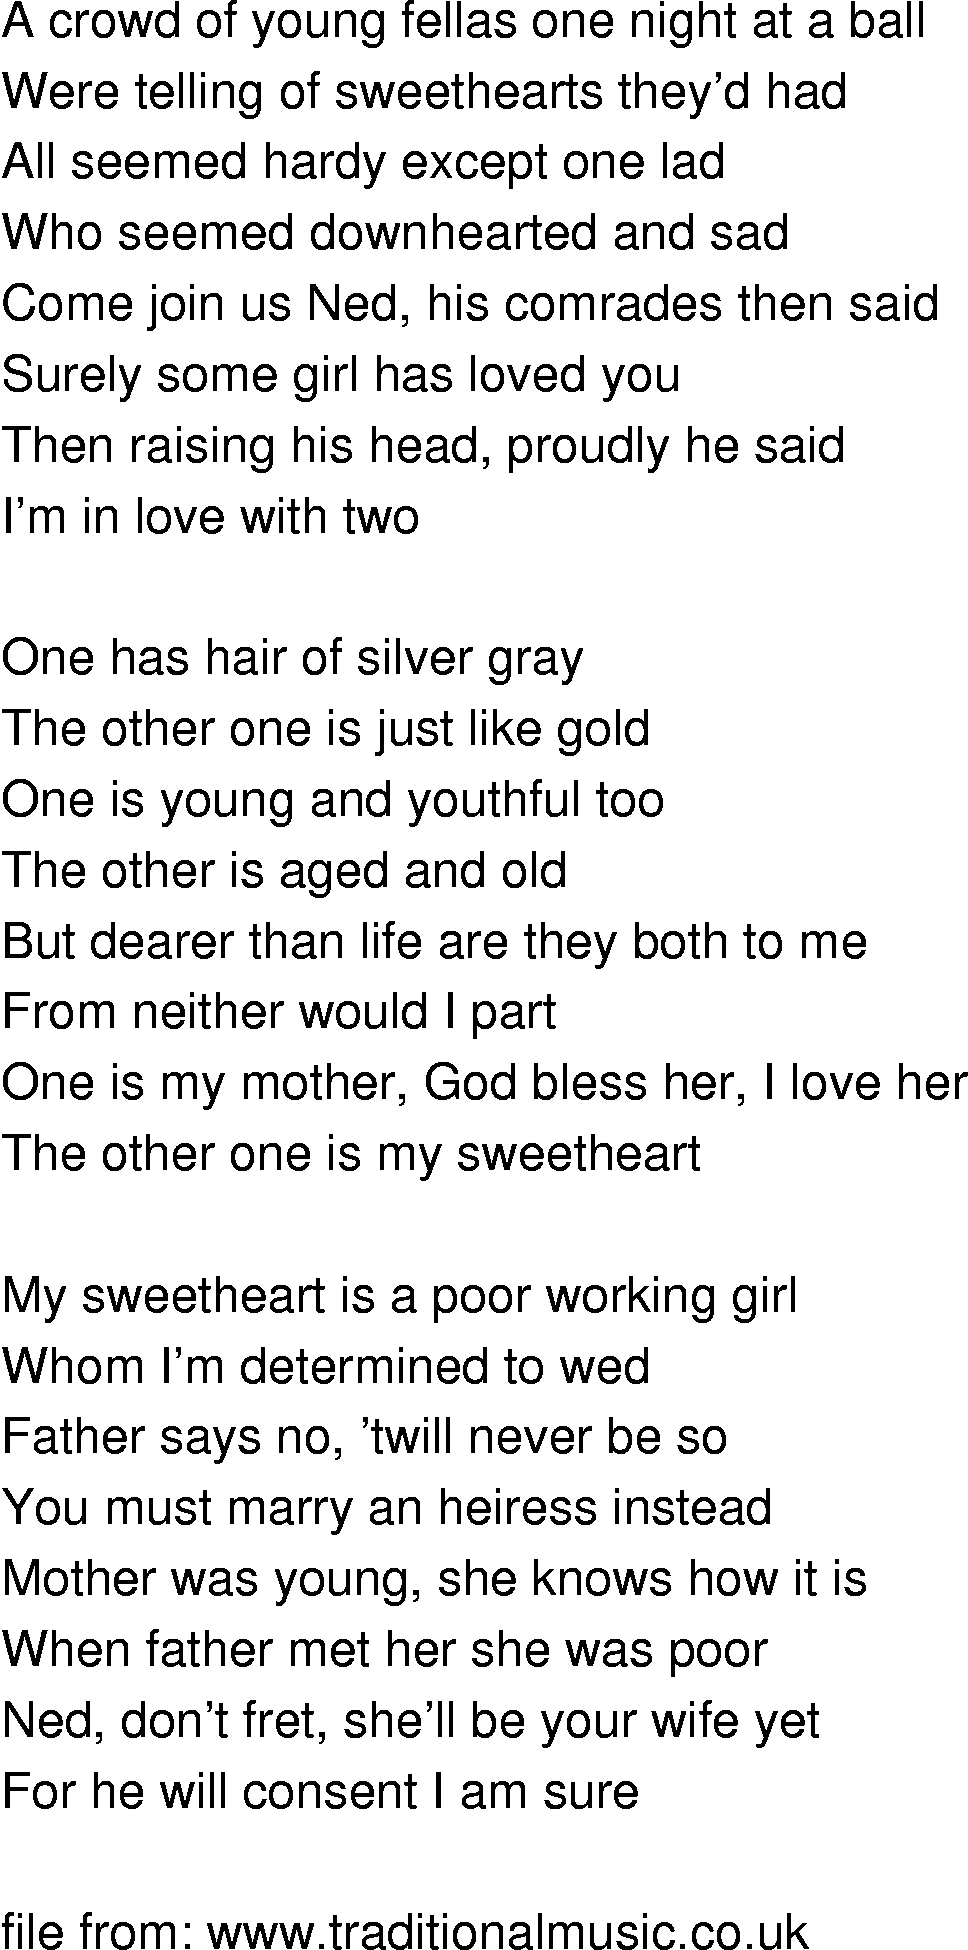 Old-Time (oldtimey) Song Lyrics - two sweethearts